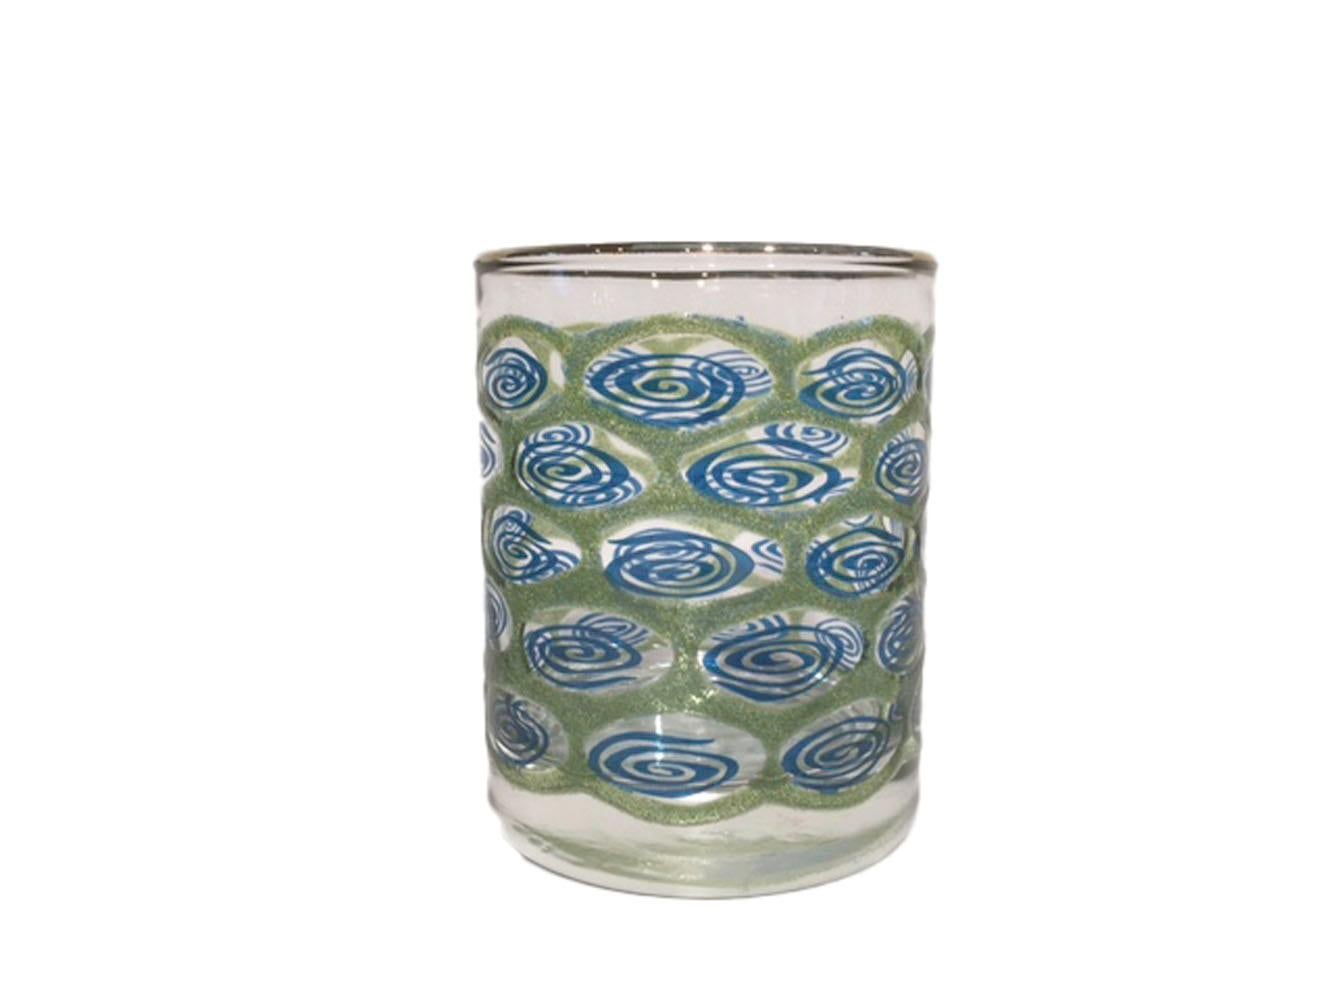 Mid-Century Modern barware by Libbey Glass Co - Set of six rocks glasses with gilded rims and raised translucent green enamel surrounding ovals containing translucent blue enamel swirls evoking water. All In excellent condition.